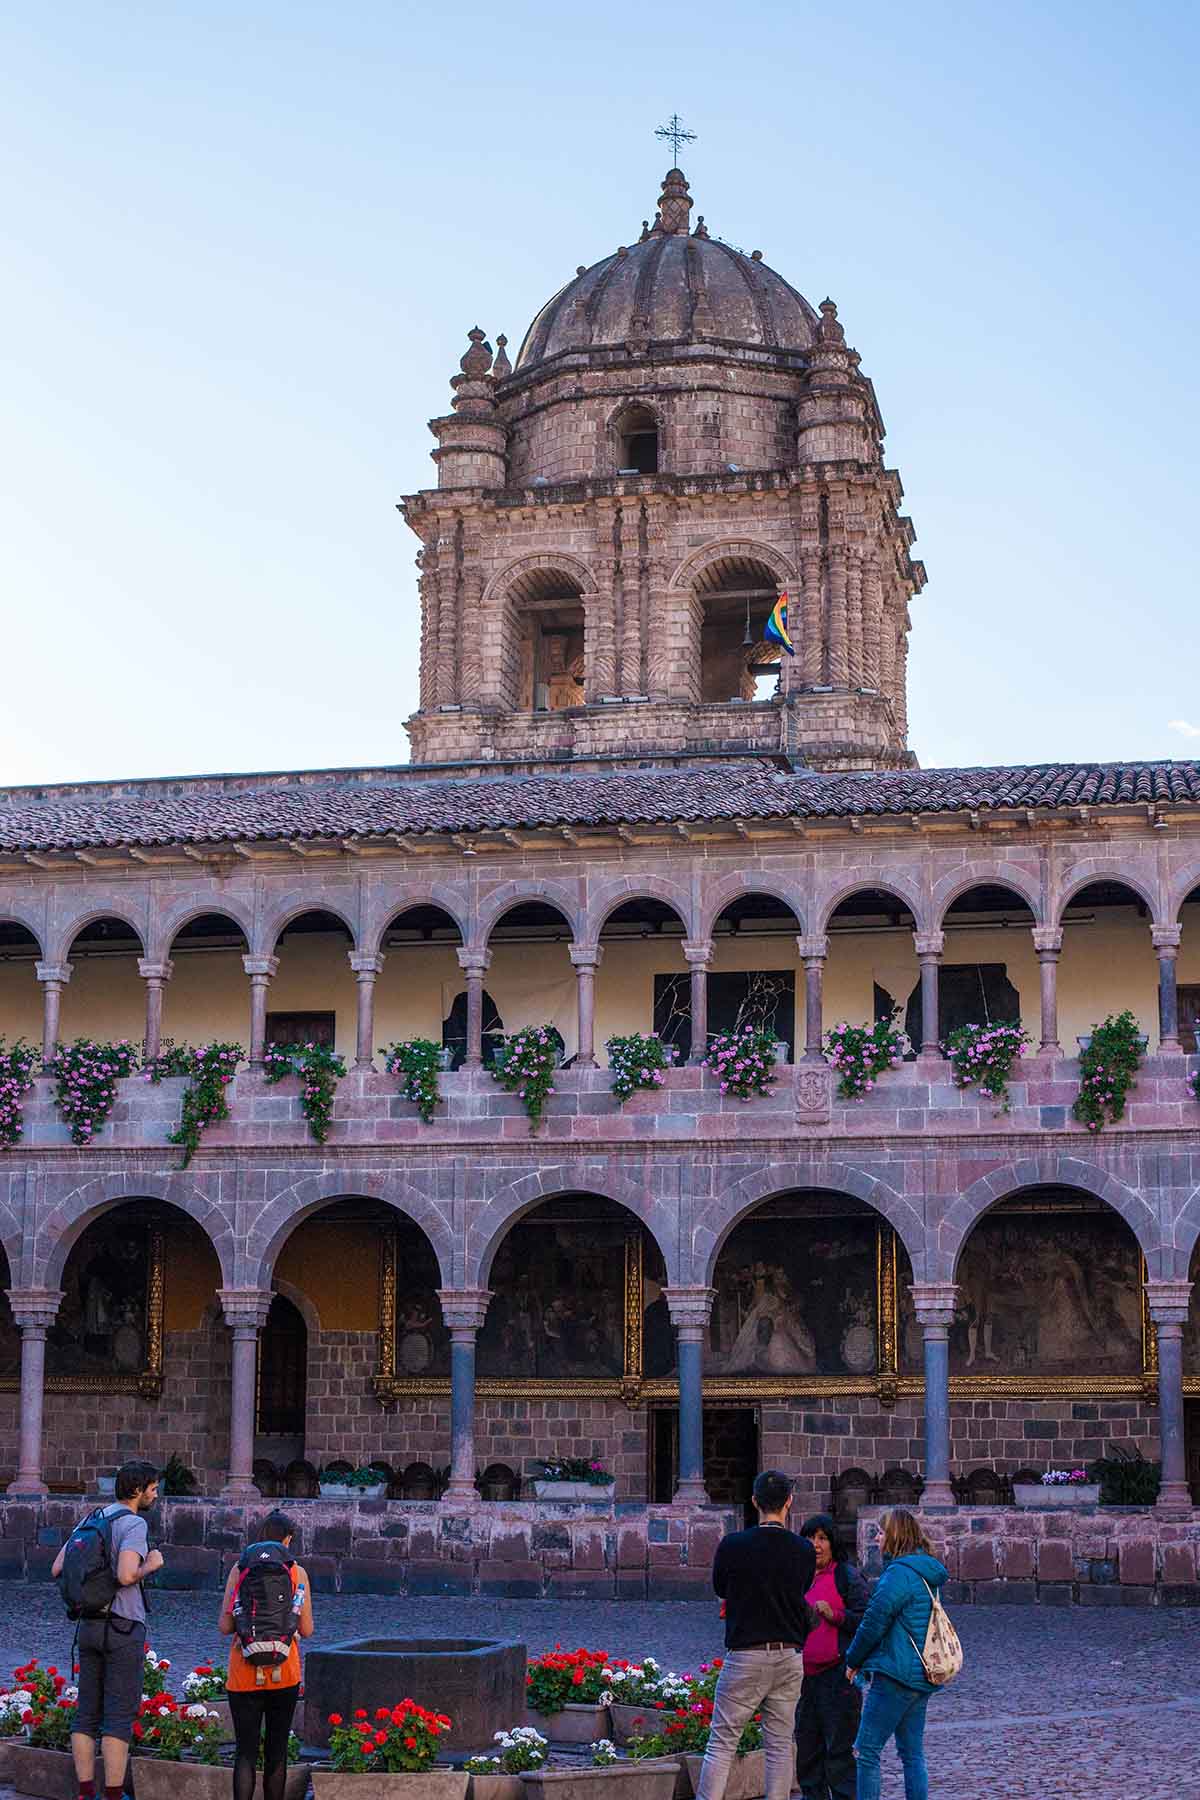 Two stories of arcaded paths surround the courtyard of the stone Santo Domingo church.